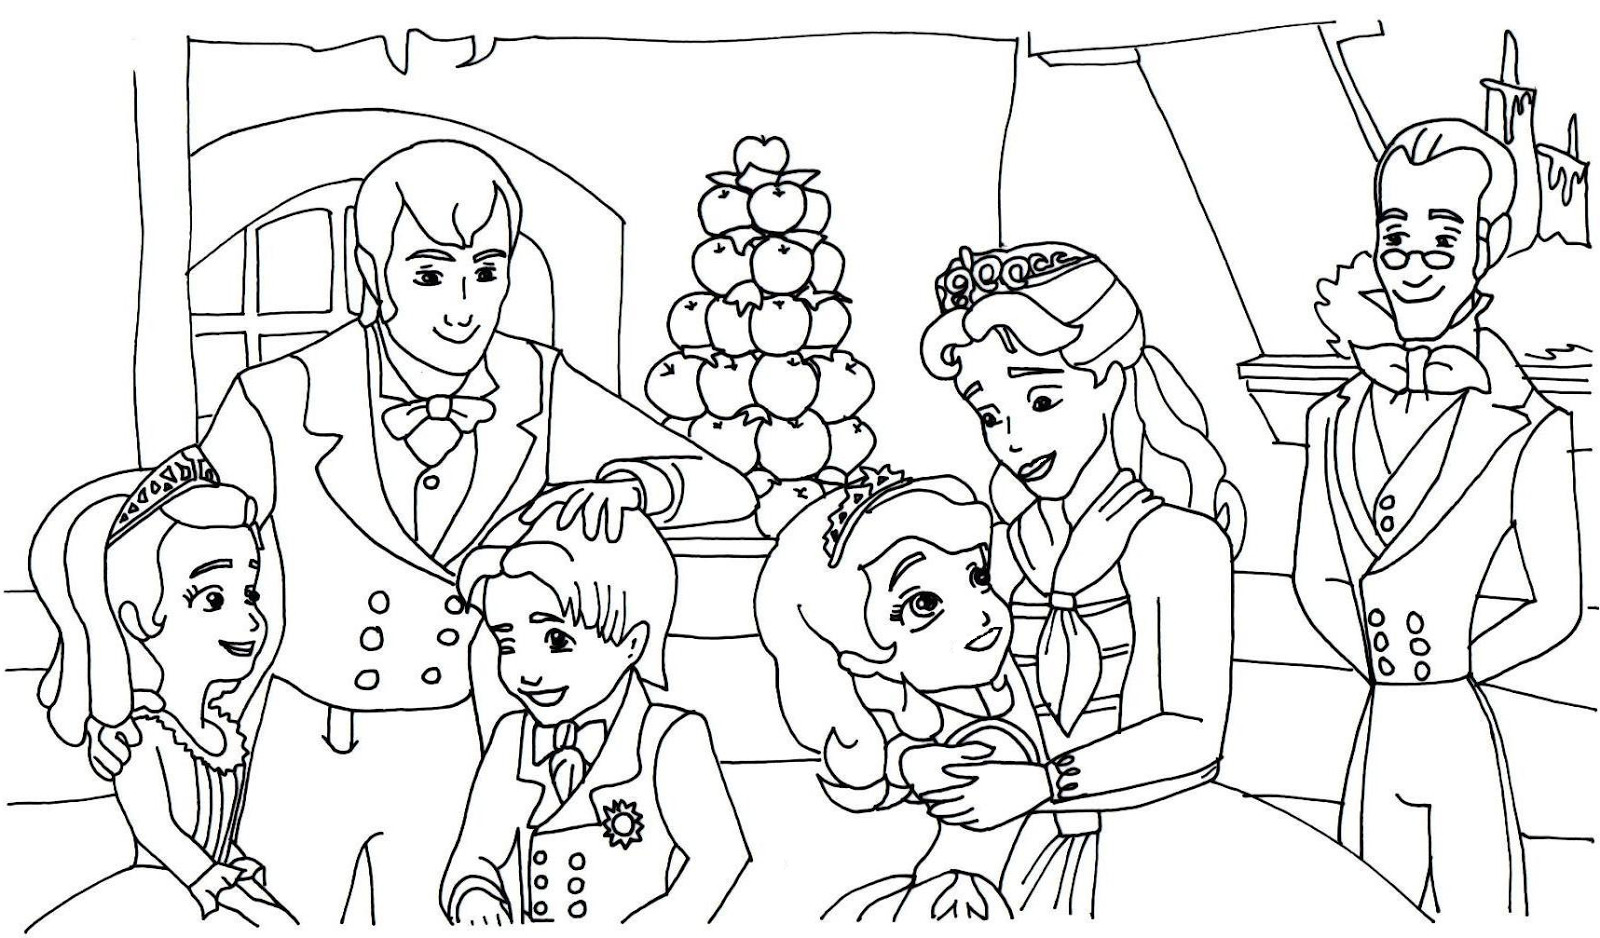 Sofia The First Printable Coloring Pages
 Sofia the First Coloring Pages Best Coloring Pages For Kids